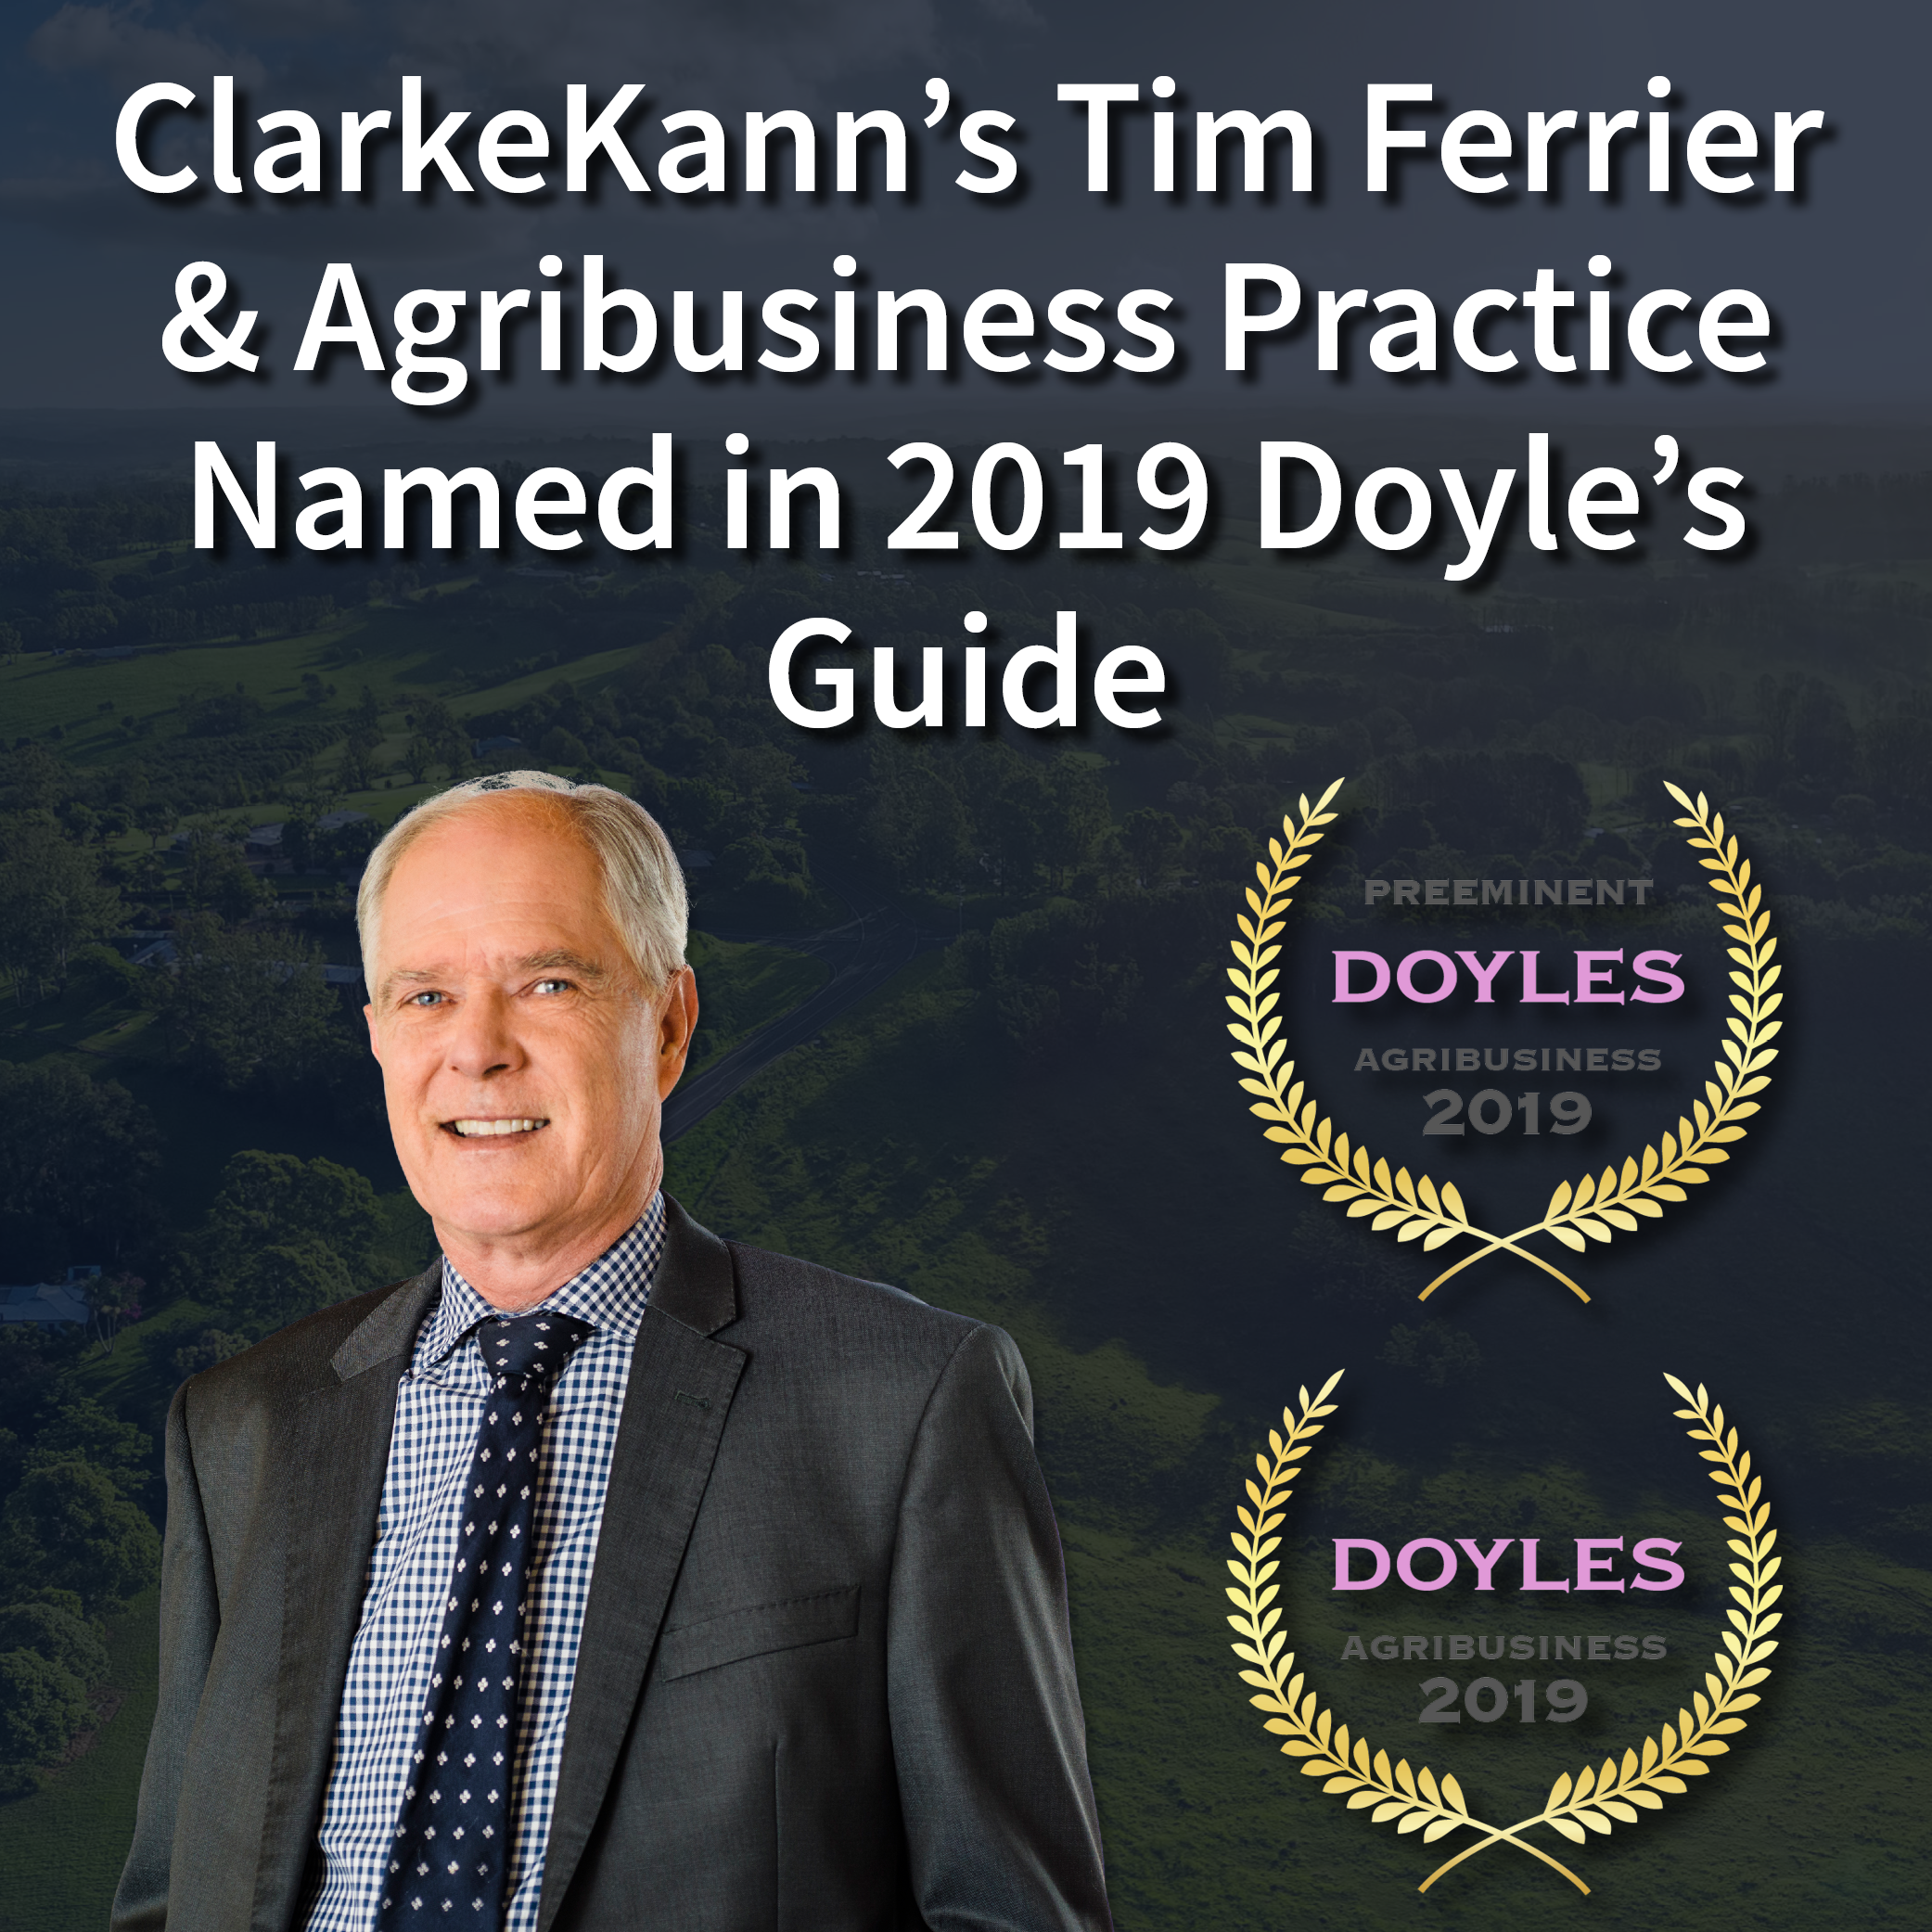 CK NEWS: ClarkeKann’s Tim Ferrier & Agribusiness Practice Named in the 2019 Doyle’s Guide